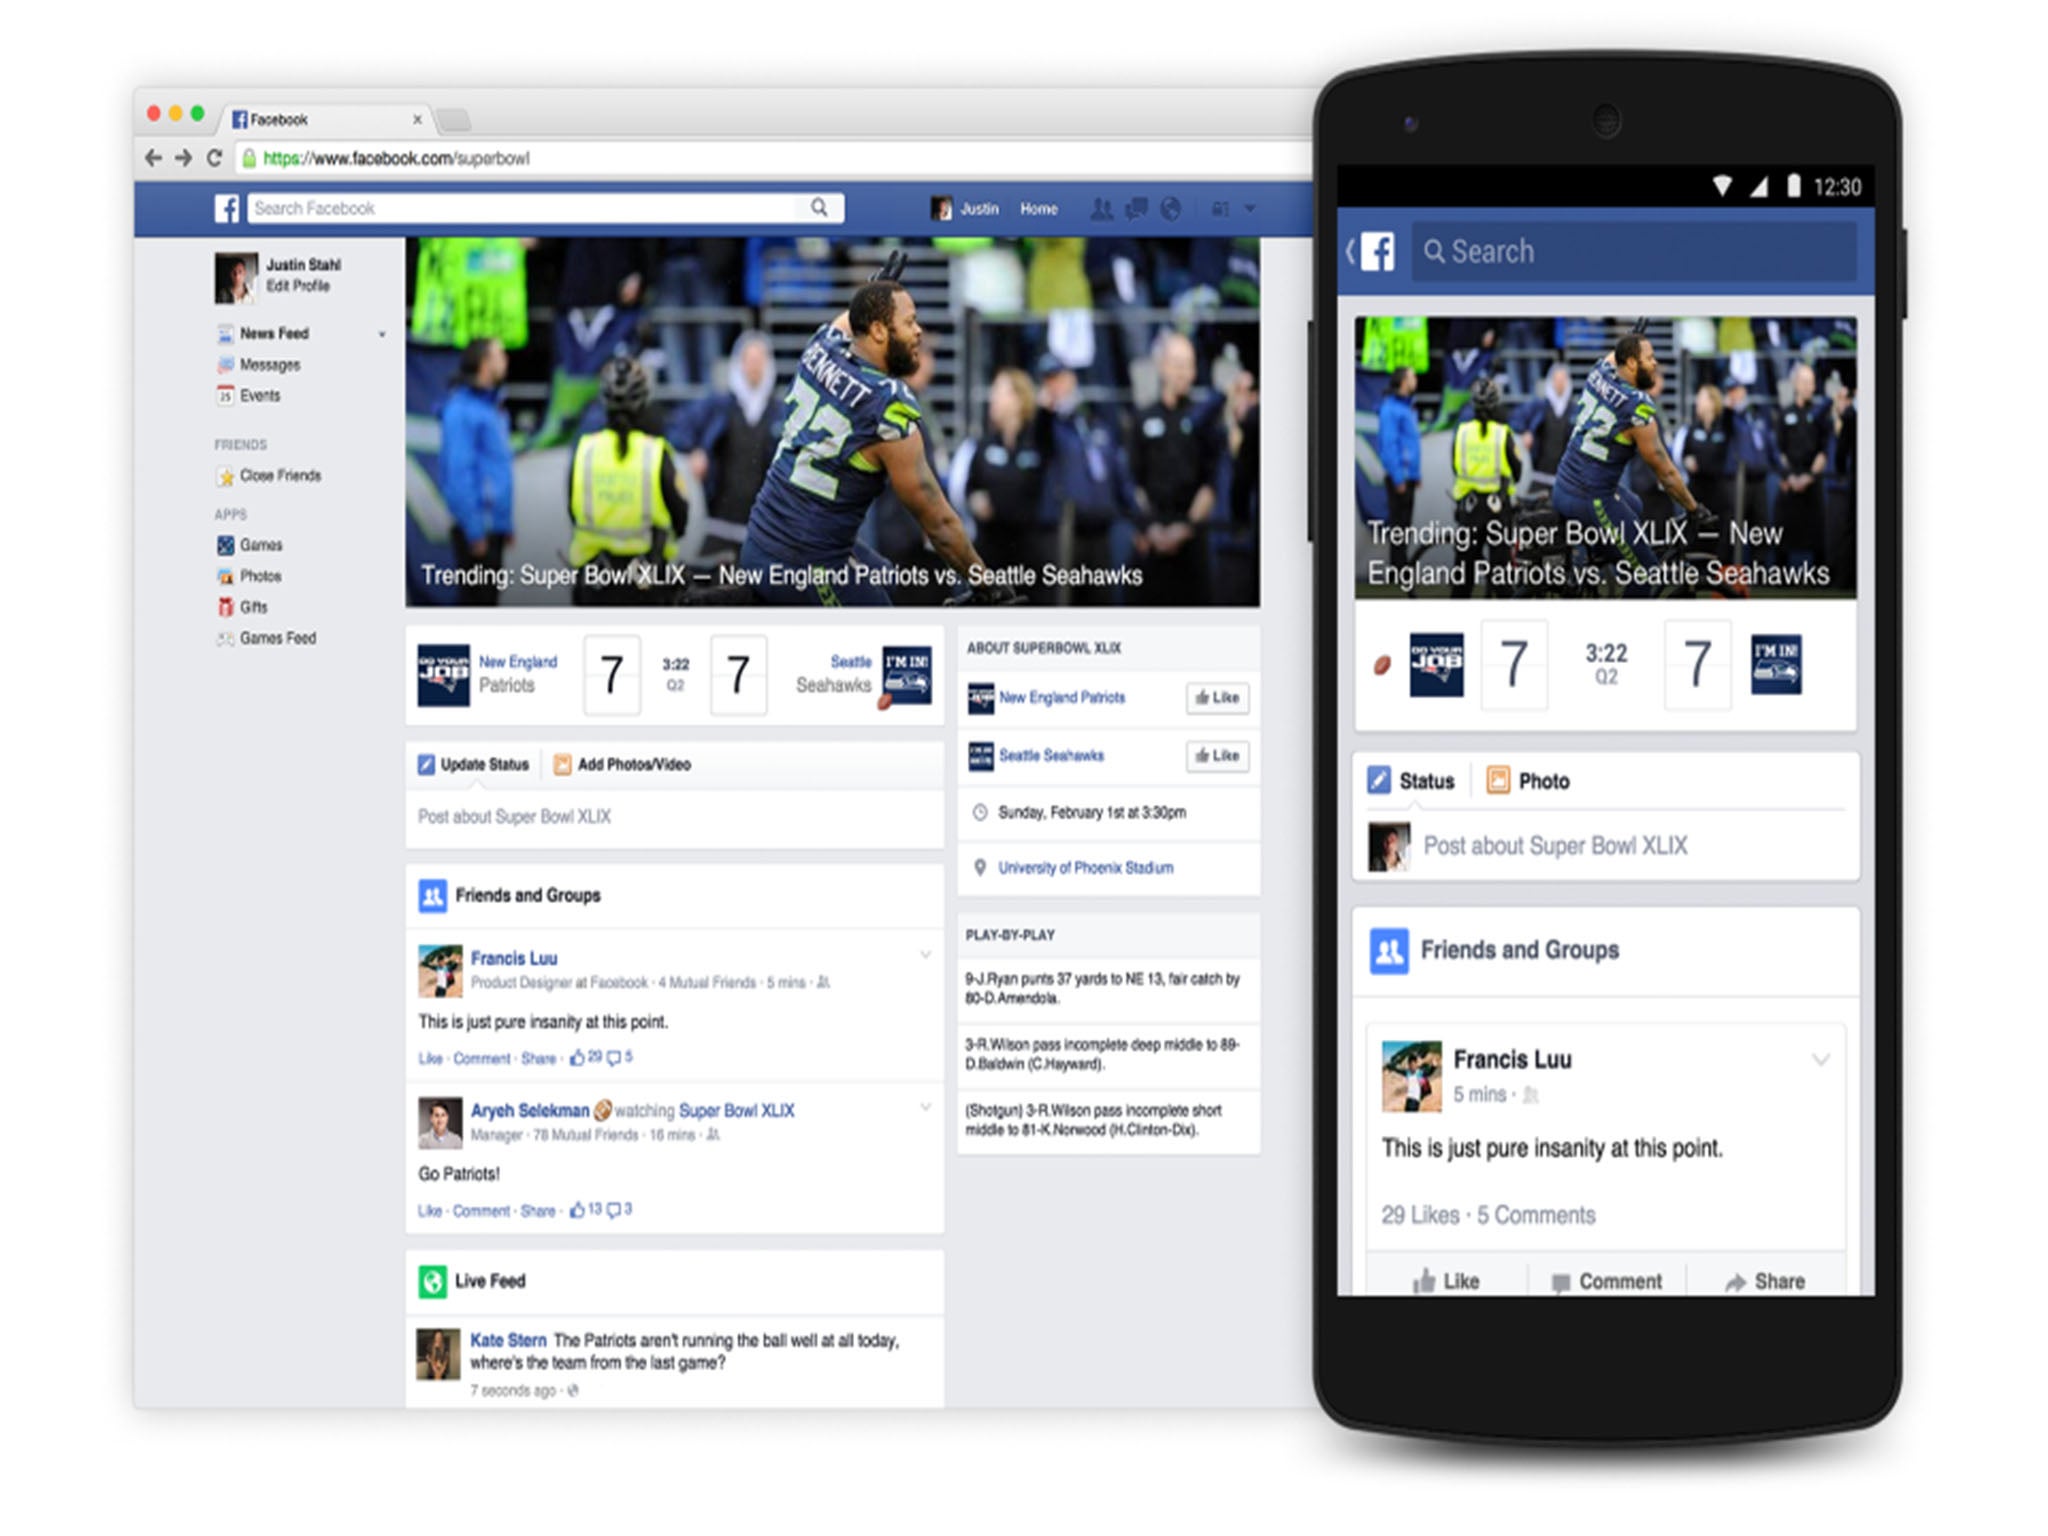 Facebook wants to take the Super Bowl online. Facebook.